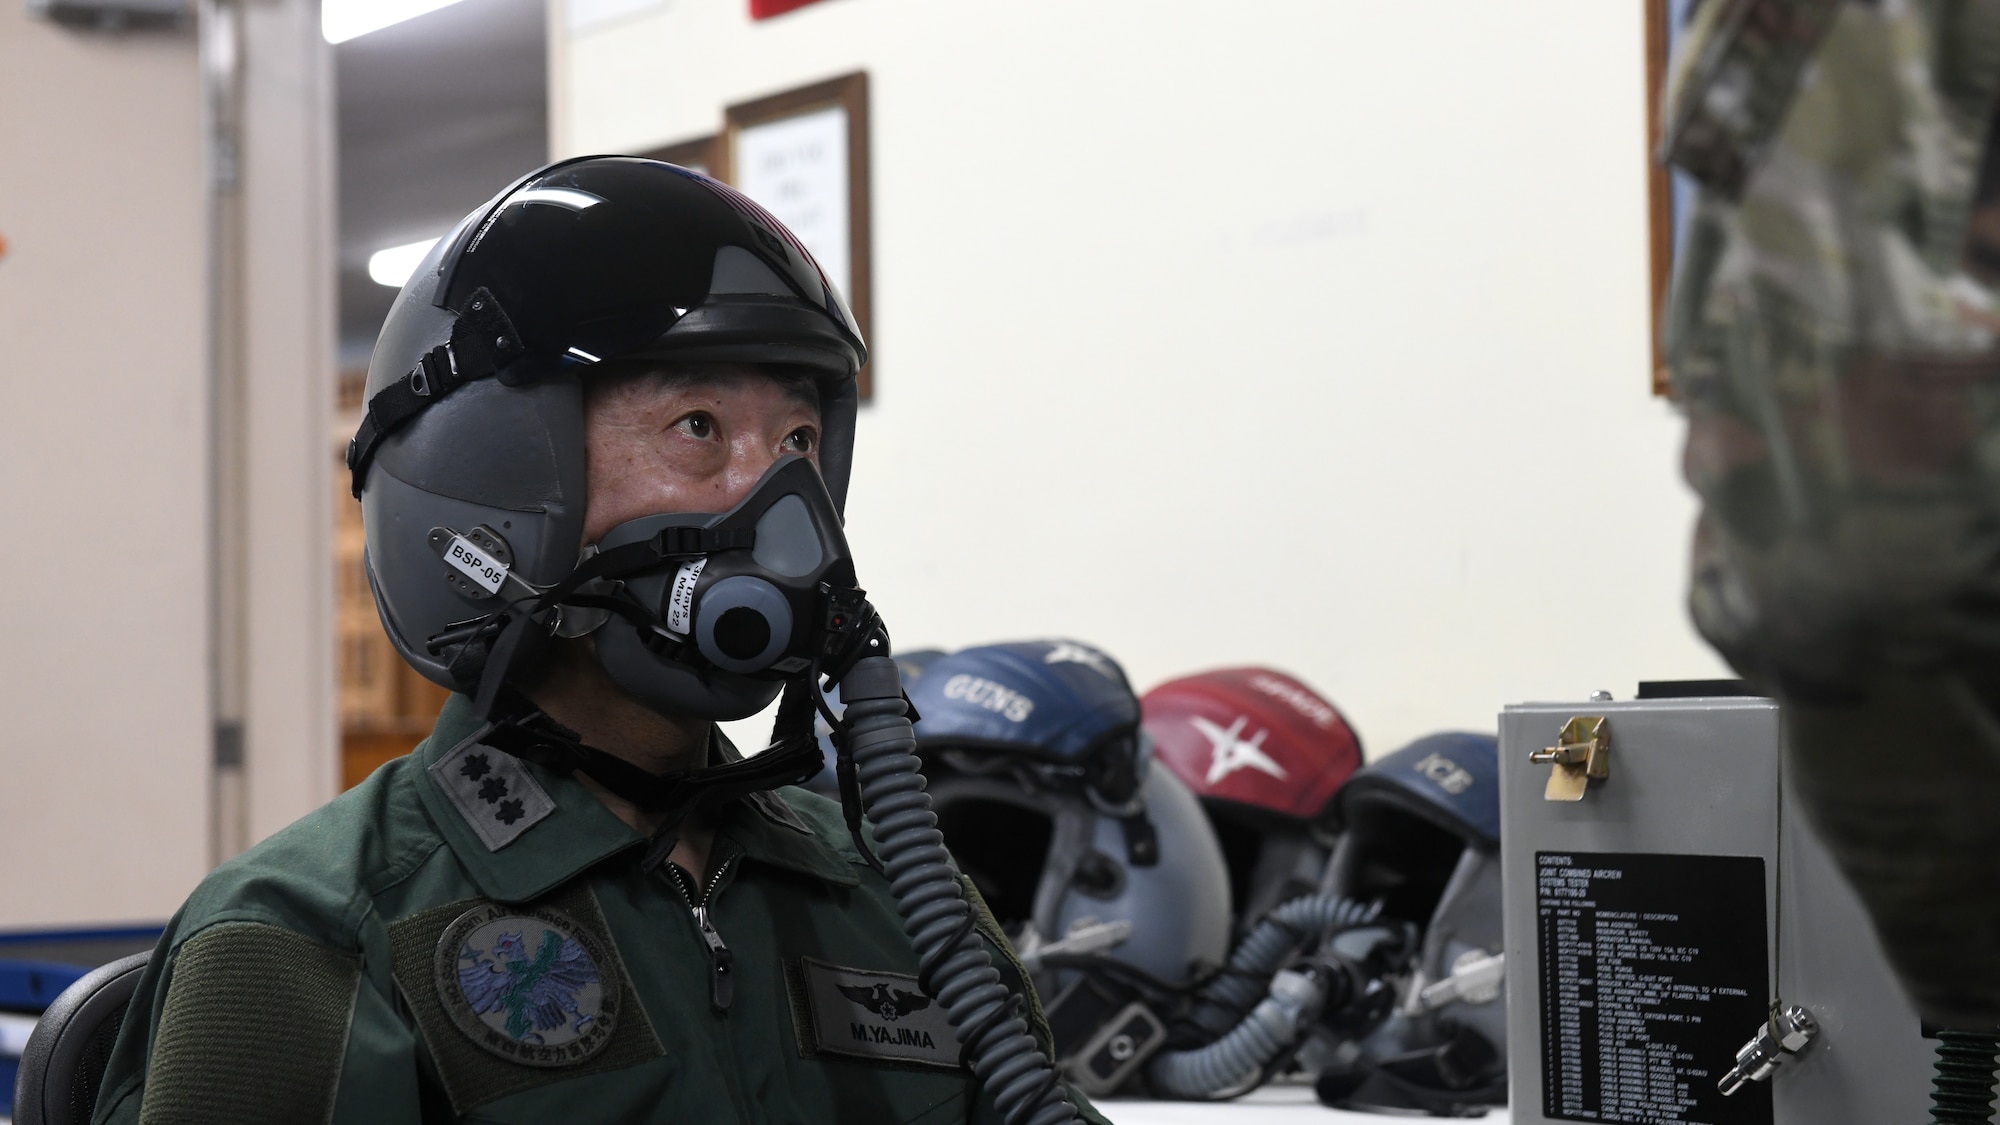 Japan Air Self-Defense Force Lt. Gen. Masahito Yajima, Southwestern Air Defense Force commander, tests an oxygen mask prior to a familiarization flight at Kadena Air Base, Japan, April 12, 2022. Yajima’s visit to Kadena highlighted the 18th Wing's commitment to strengthening the alliance between U.S. and Japanese forces by fortifying their combined combat capabilities in support of a free and open Indo-Pacific. (U.S. Air Force photo by Staff Sgt. Benjamin Raughton)